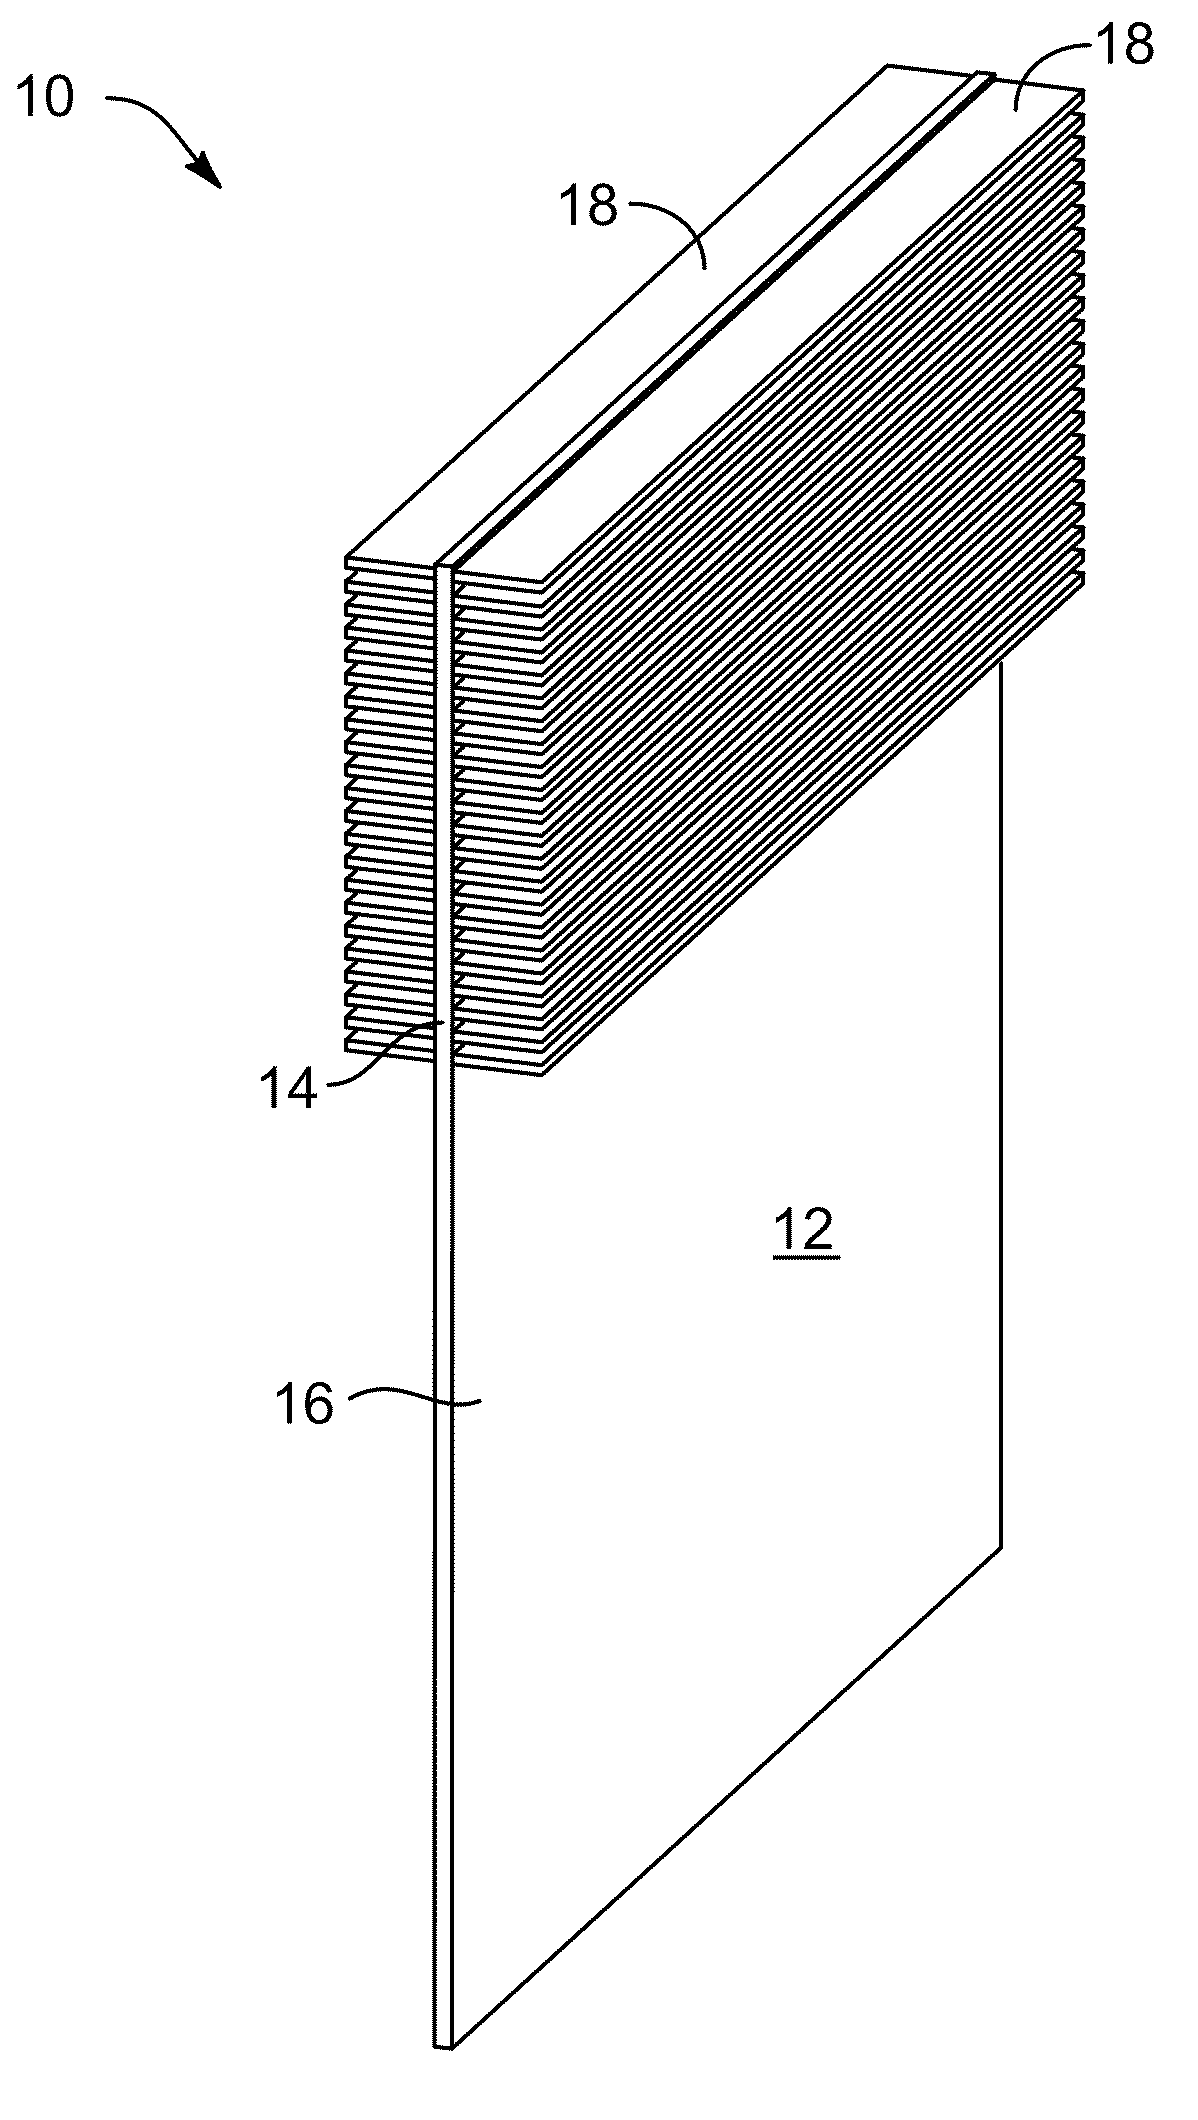 Two-phase-flow, panel-cooled, battery apparatus and method